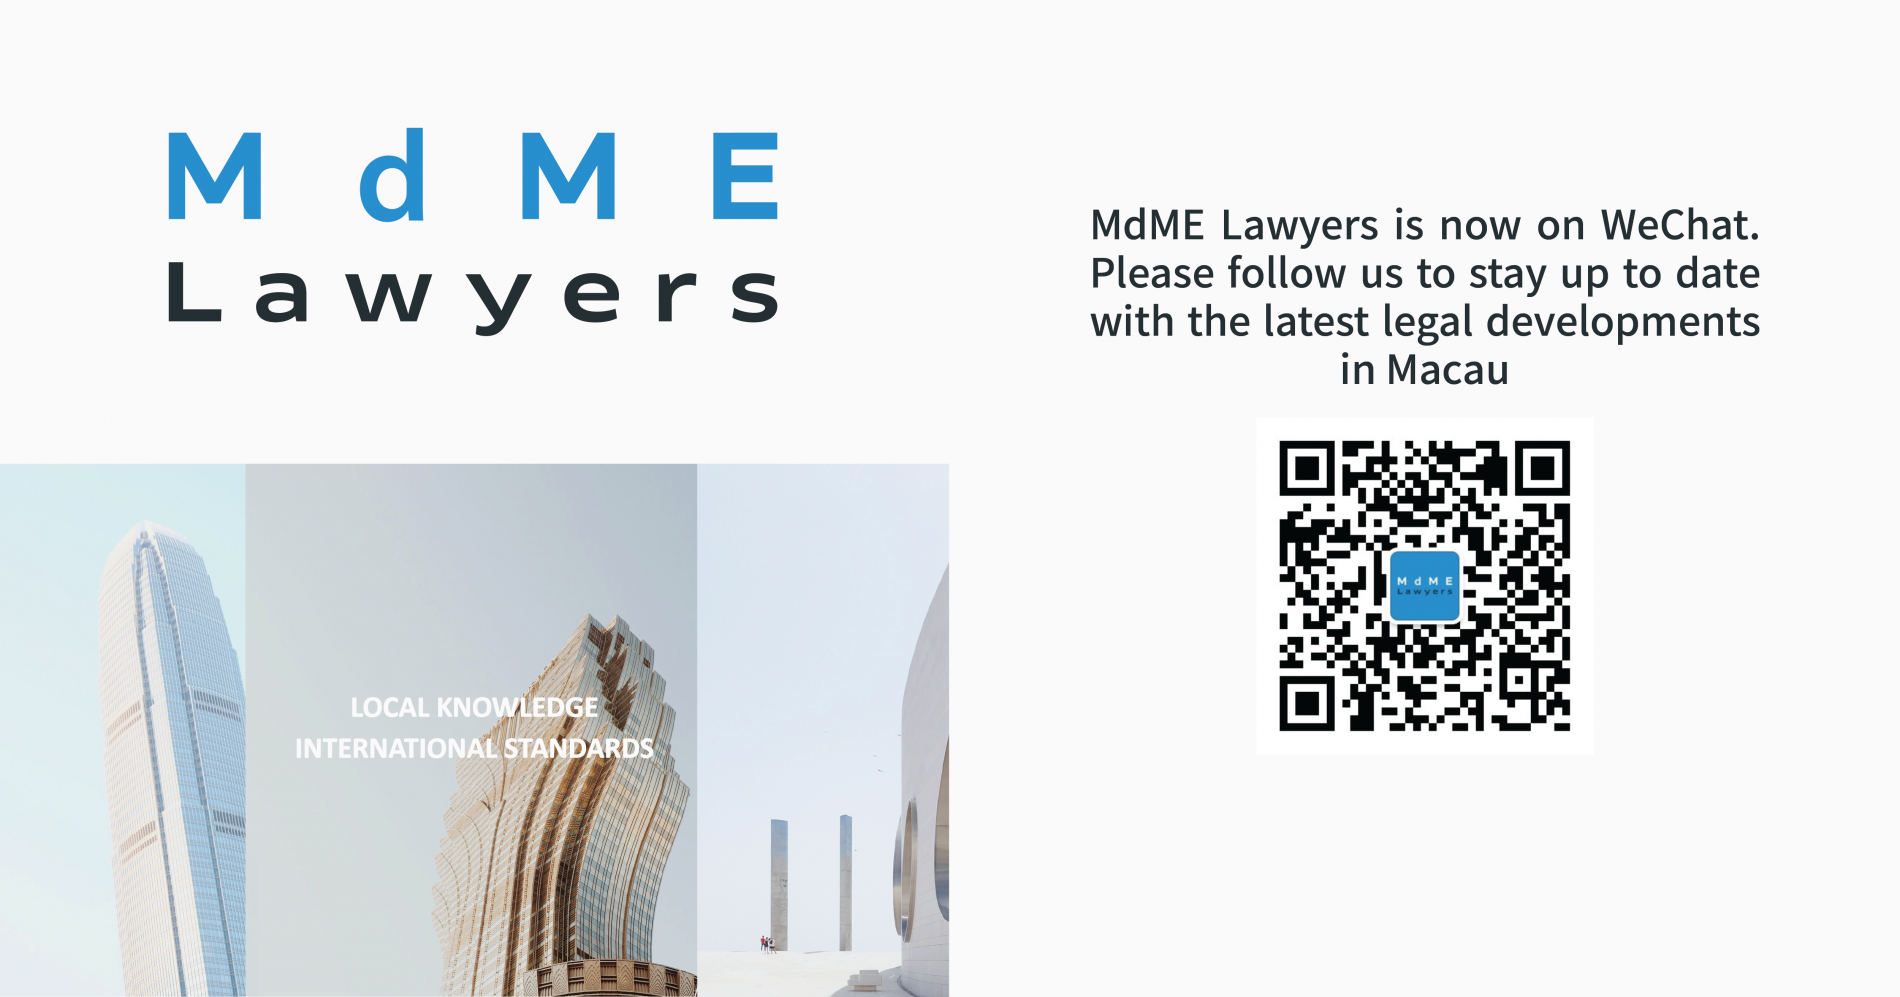 MdME Lawyers is now on WeChat!